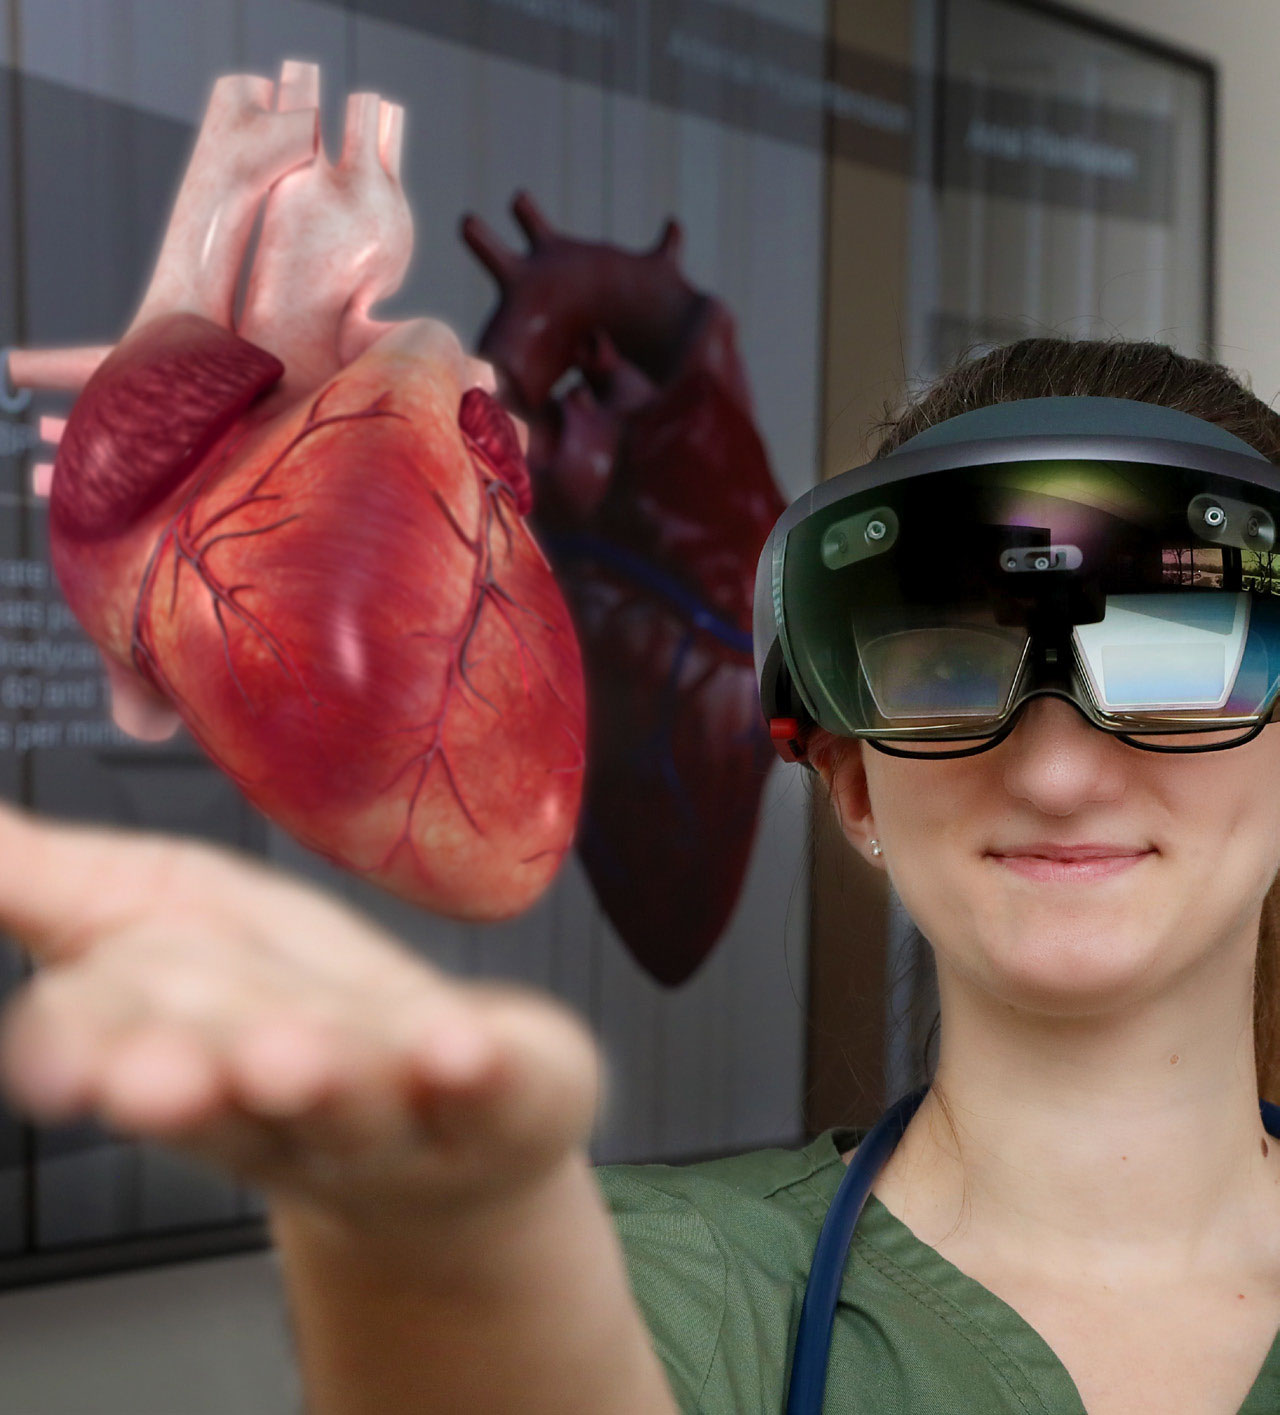 WCC nursing student Alexis LeBlanc uses a pair of Microsoft HoloLens to interact with a virtual human heart using the Insight Heart app. A one-dimensional version of what she’s seeing is displayed on the monitor behind her.